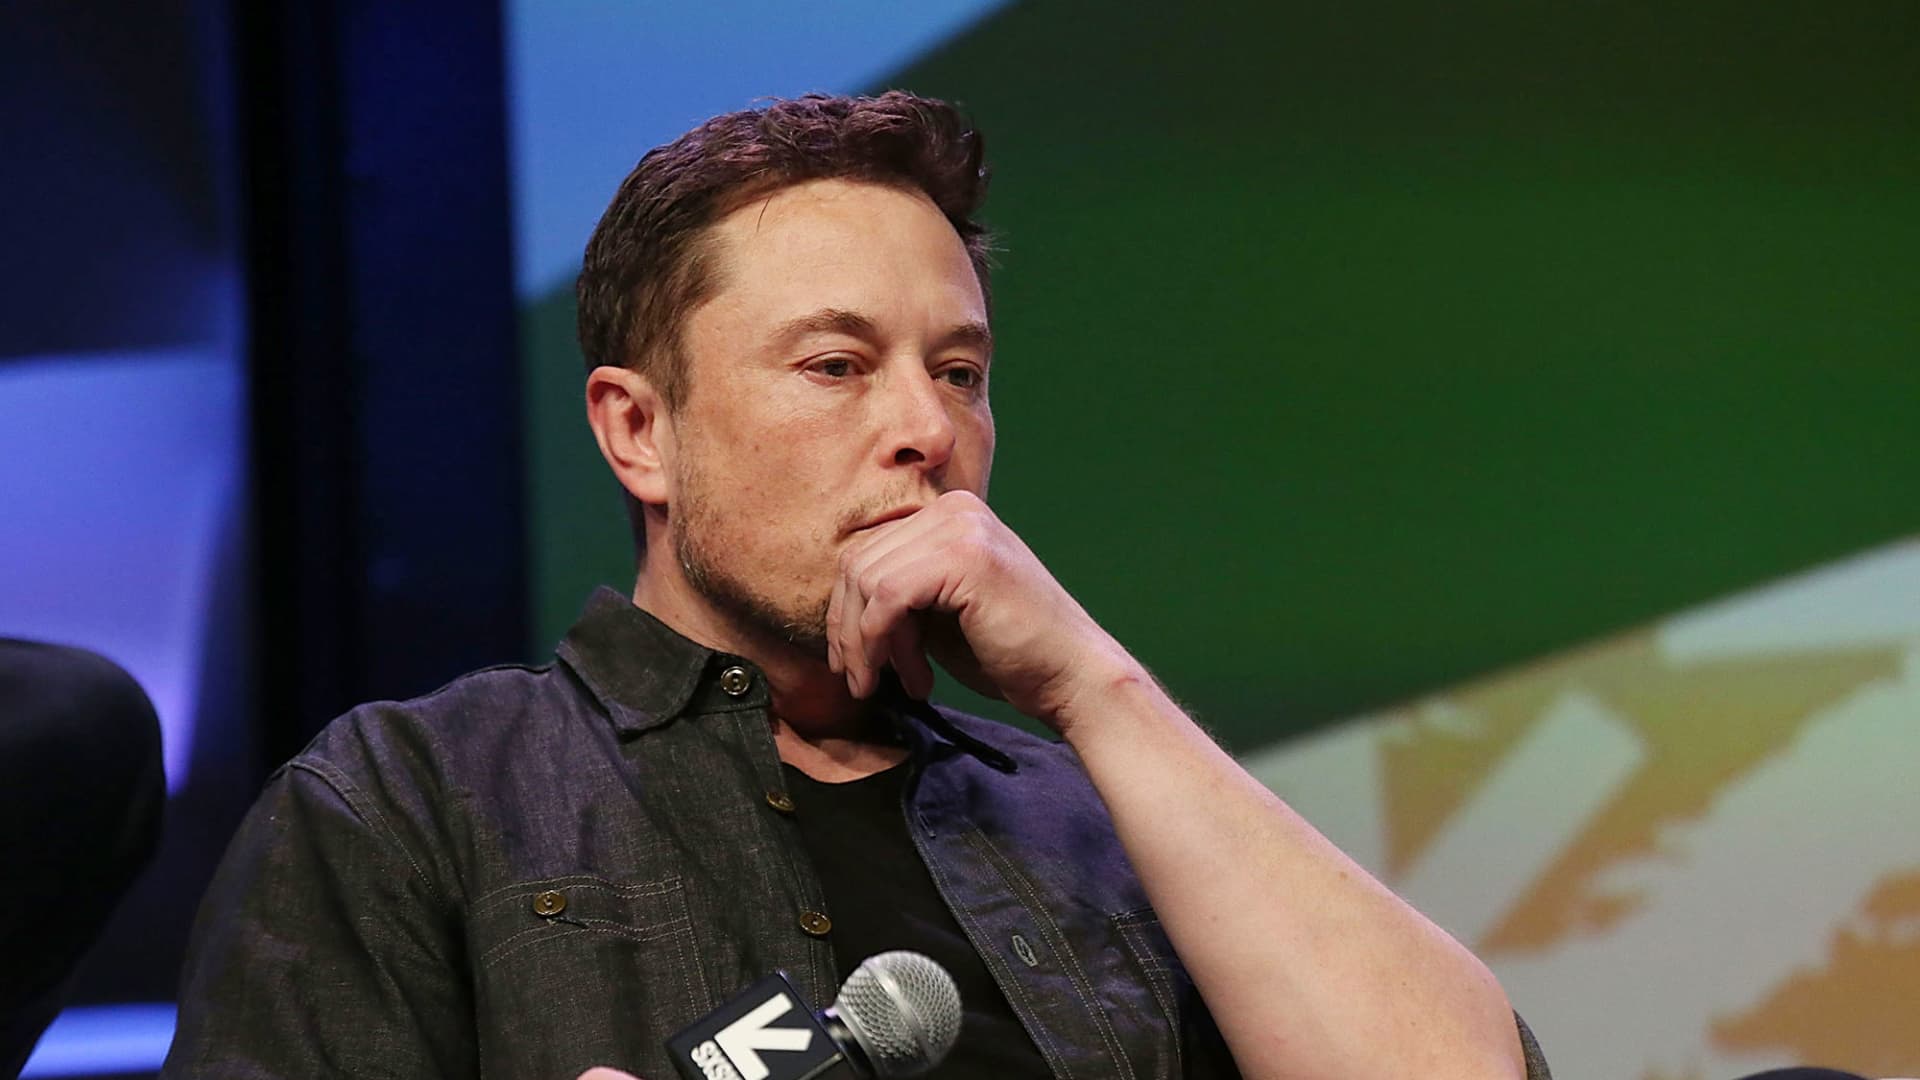 Elon Musk backs ‘tight’ background checks for all gun sales in wake of mass shooting in Texas – World news